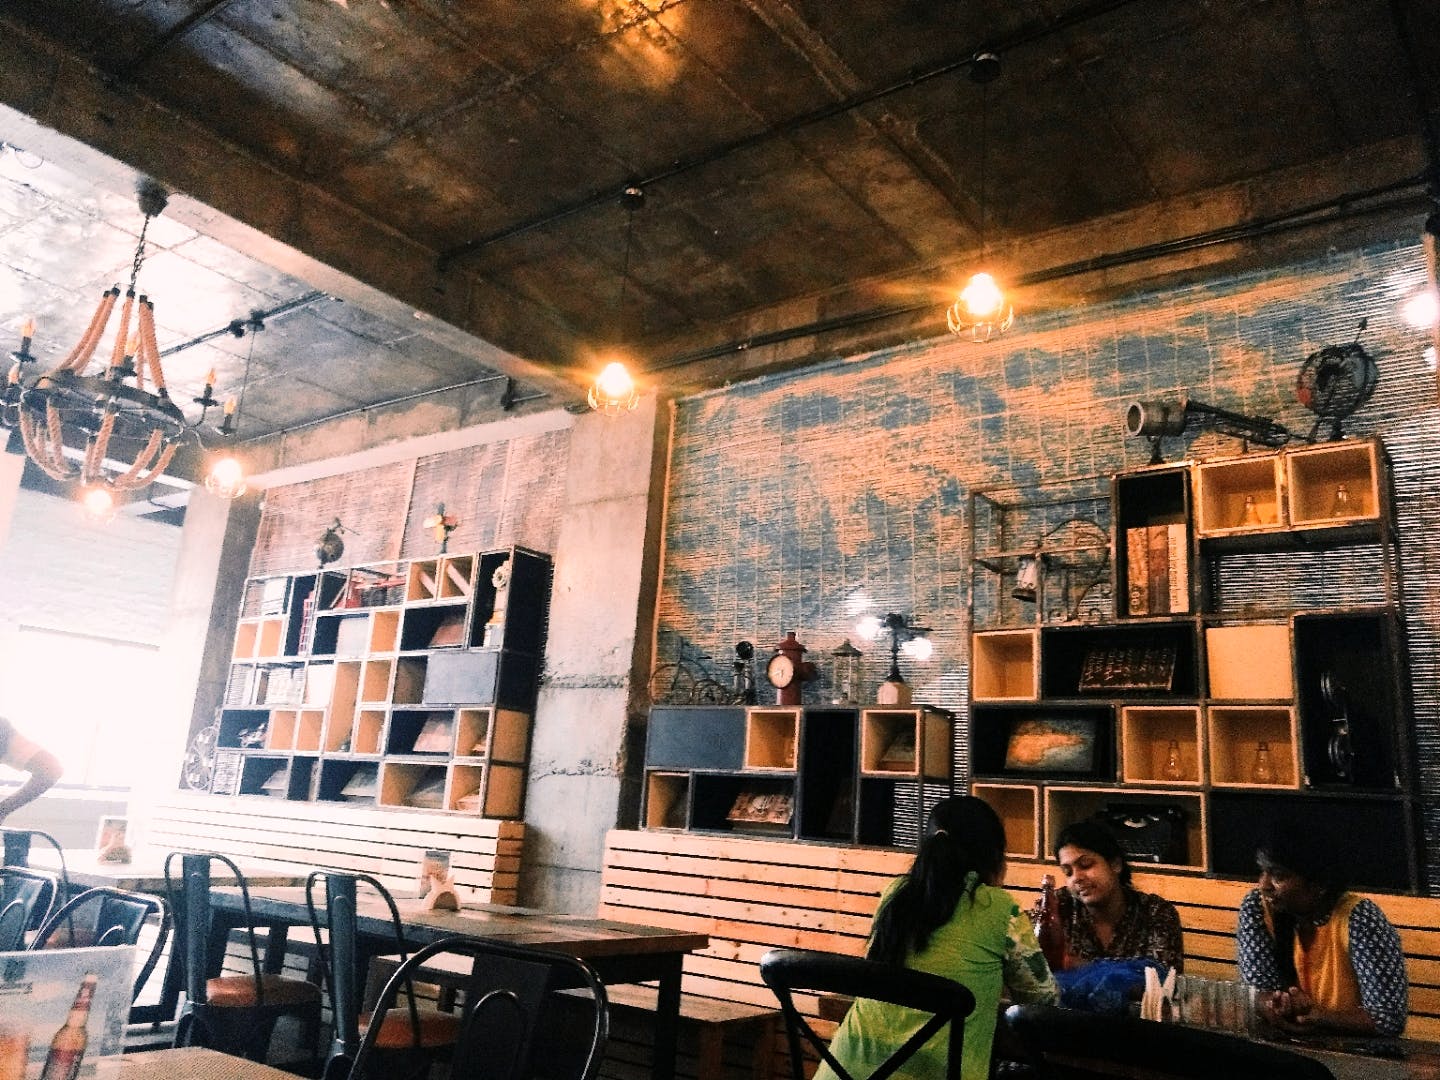 Building,Ceiling,Interior design,Architecture,Room,Restaurant,City,Coffeehouse,House,Furniture